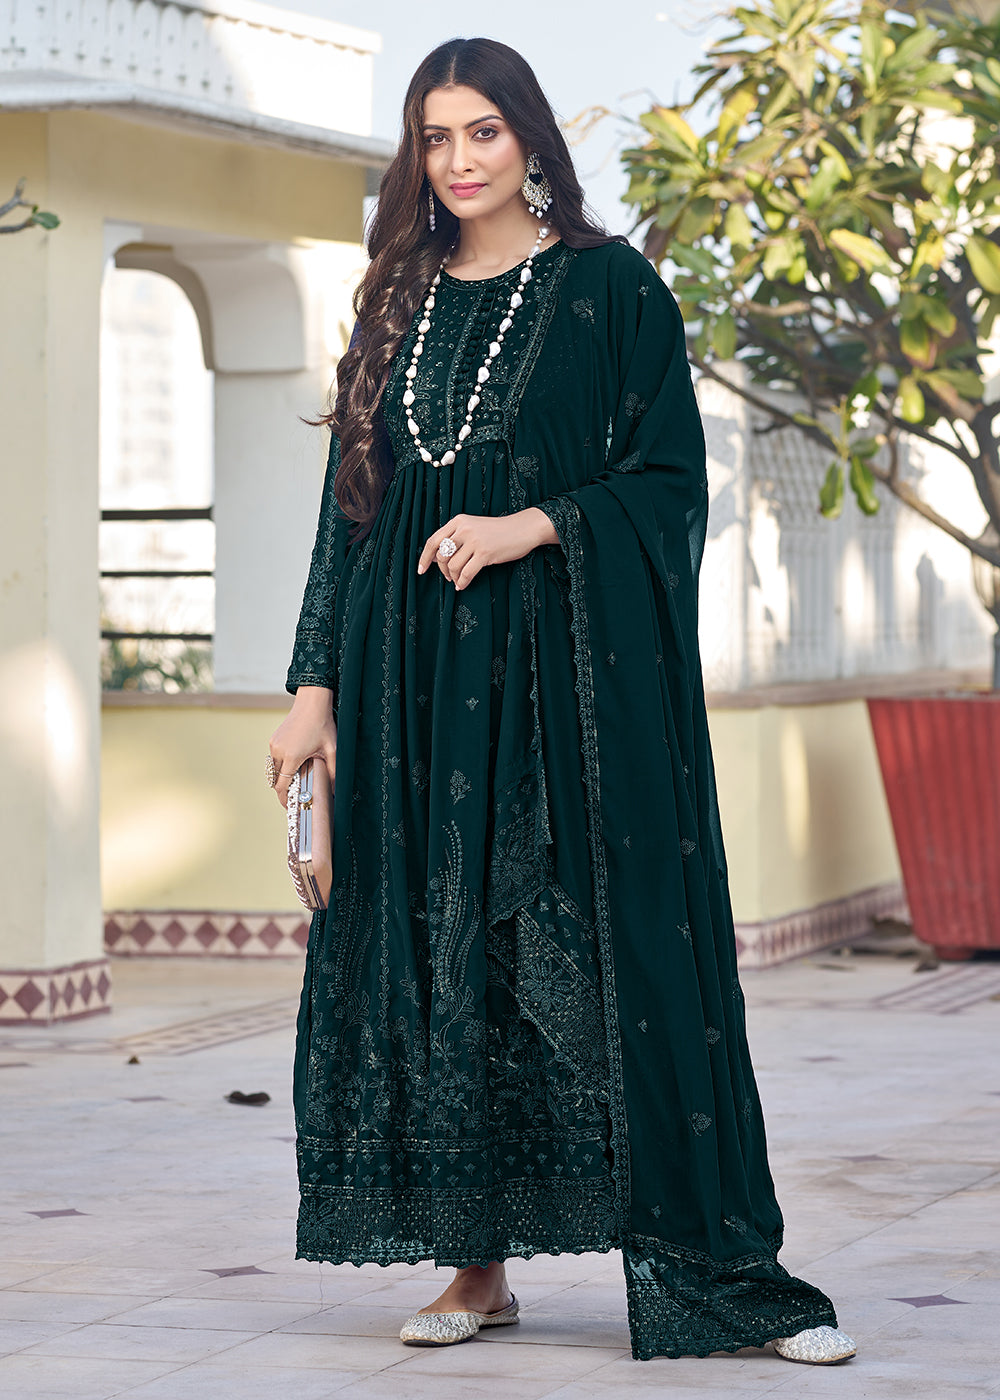 Buy Now Teal Green Georgette Embroidered Frock Style Salwar Suit Online in USA, UK, Canada, Germany, Australia & Worldwide at Empress Clothing. 